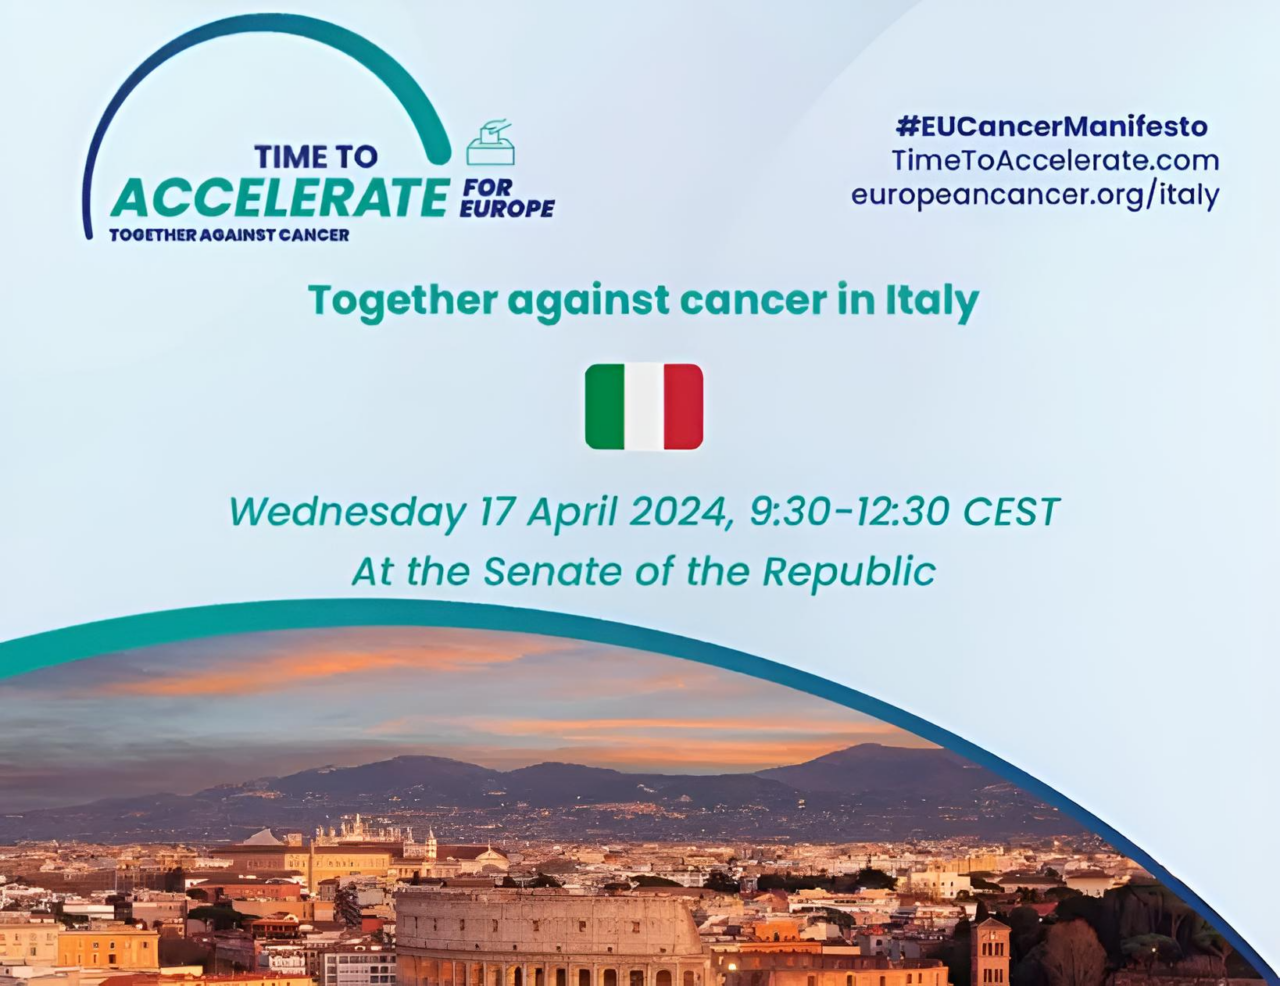 European Cancer Organisation will be at the Italian Senate, sharing best practices in early detection of cancer